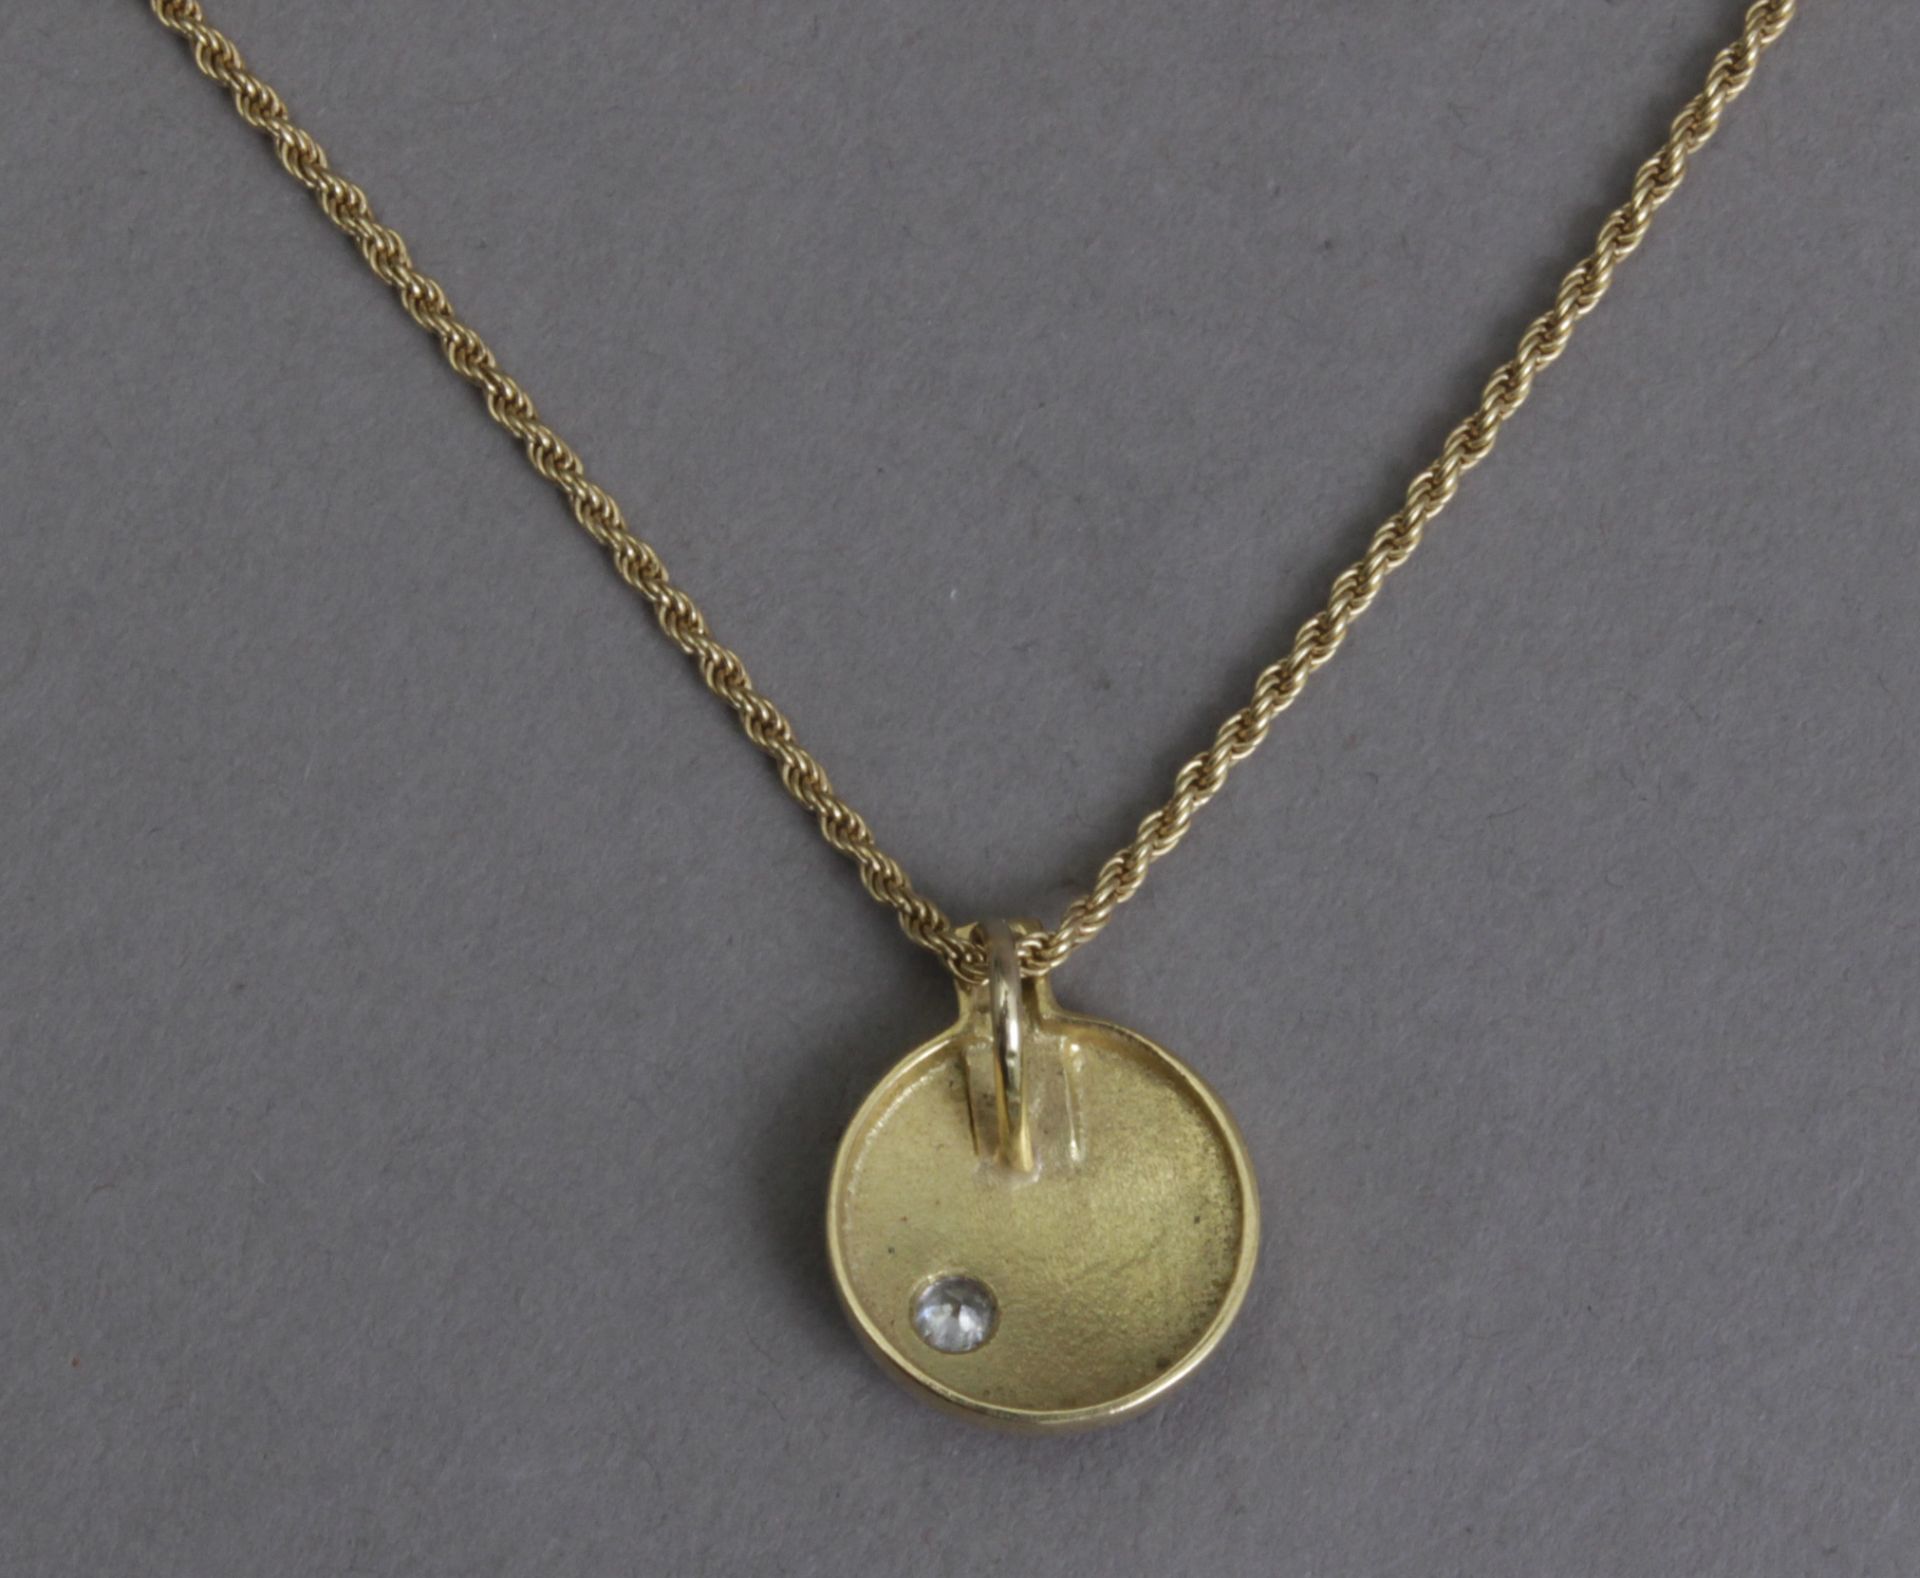 An 18k. yellow gold and brilliant cut diamond pendant and chain - Image 4 of 4